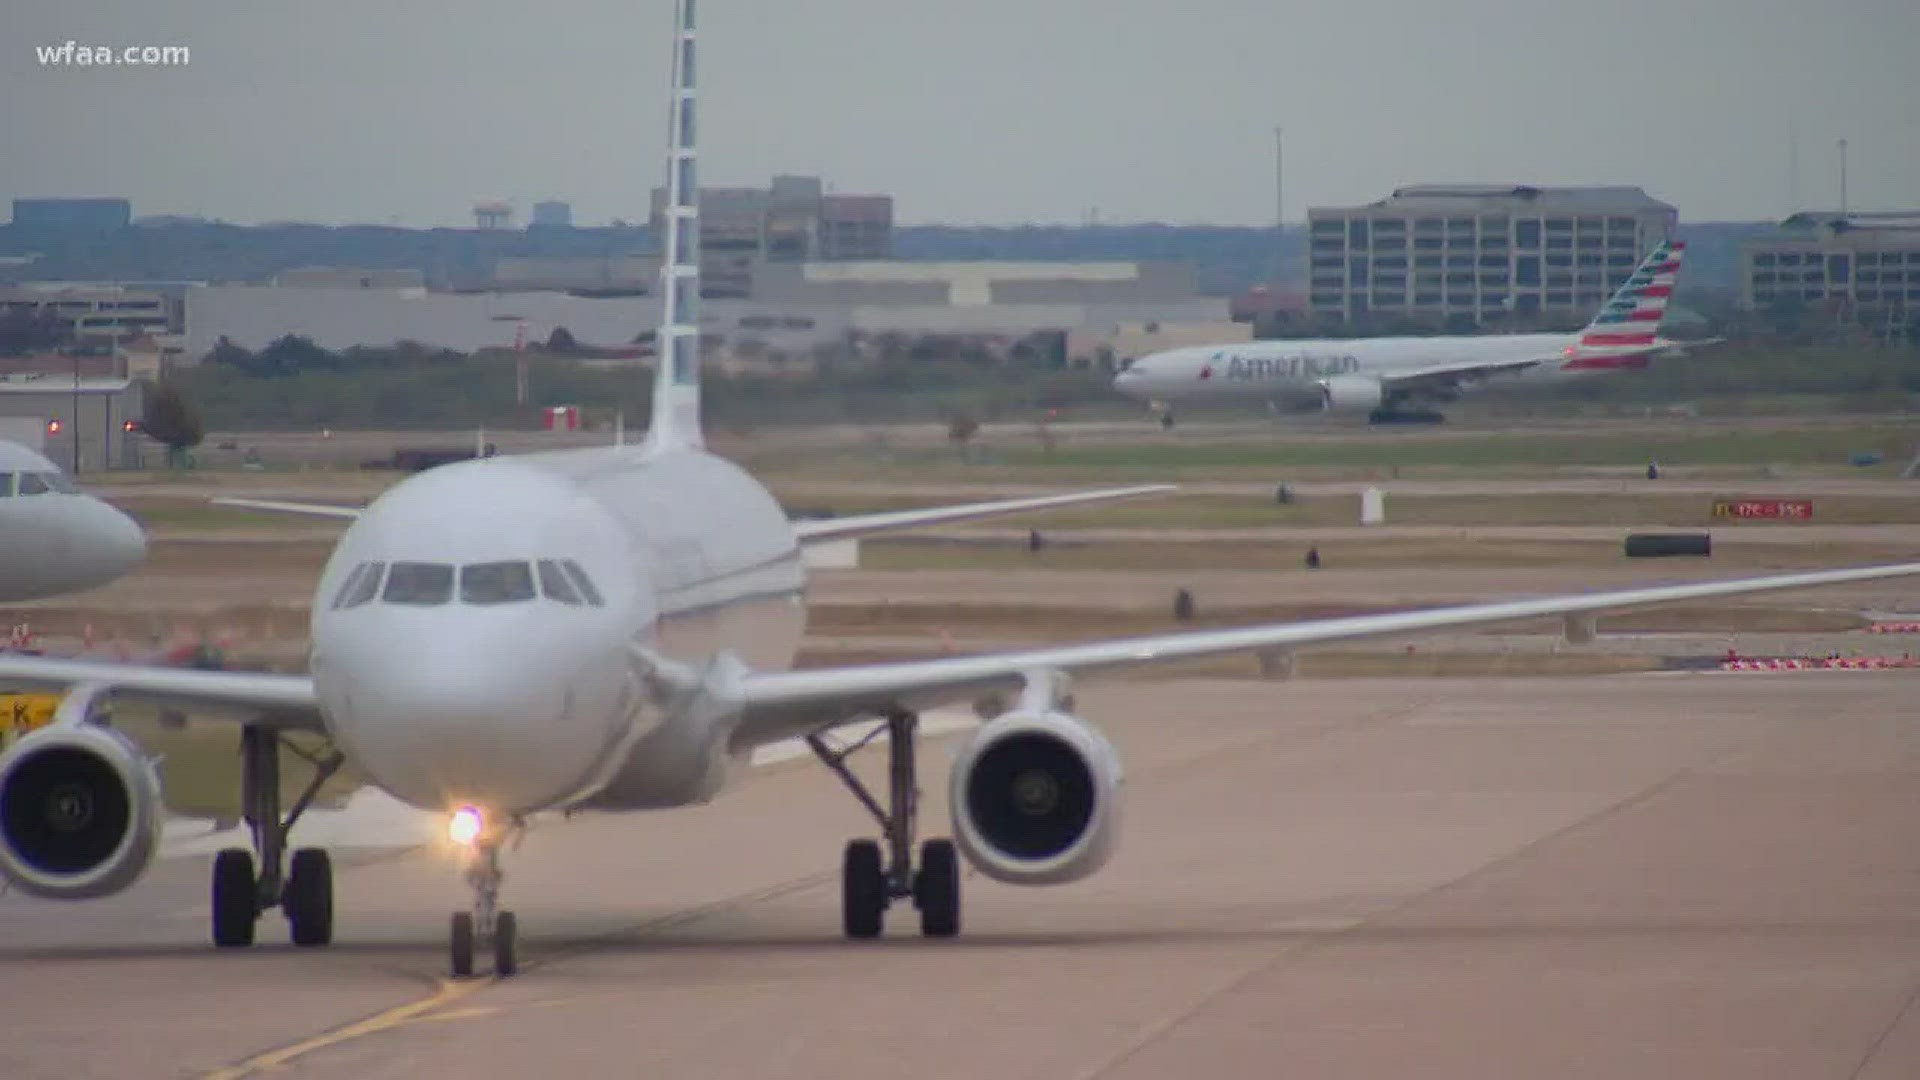 Drone taking flight at DFW Airport